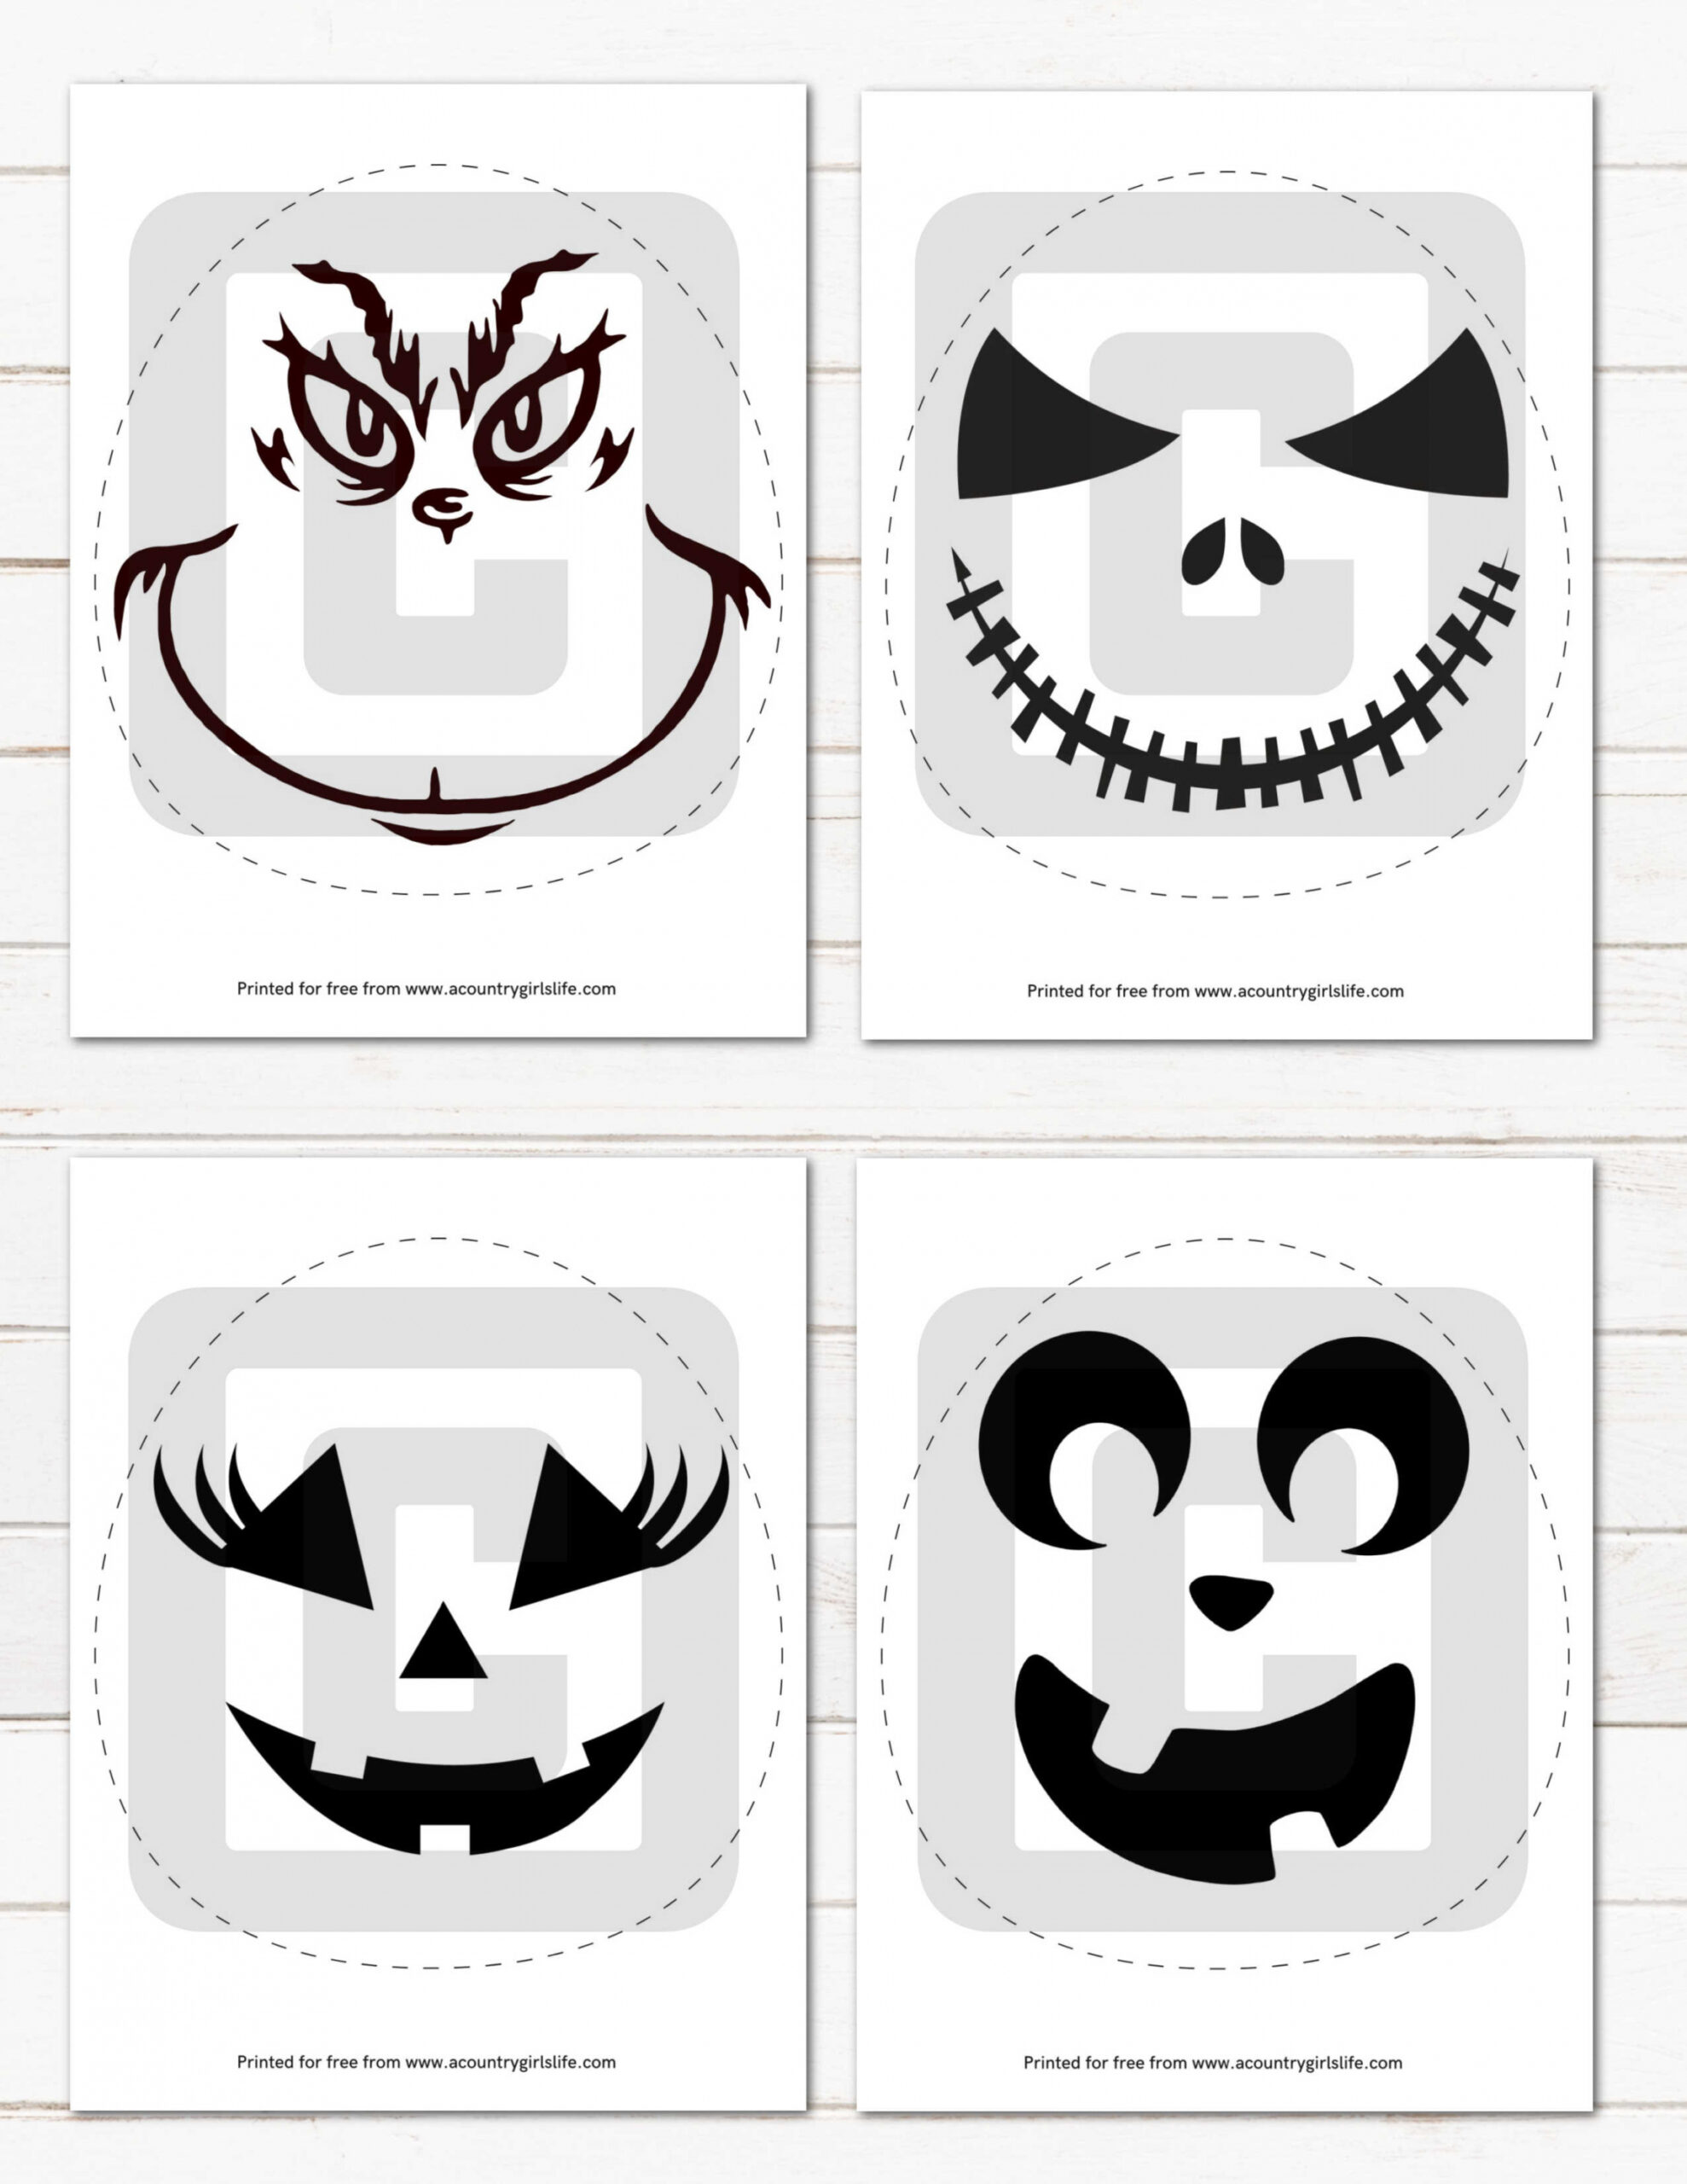 Printable Pumpkin Carving Templates Free - Printable - + EASY FREE Printable Pumpkin Carving Stencils! - A Country